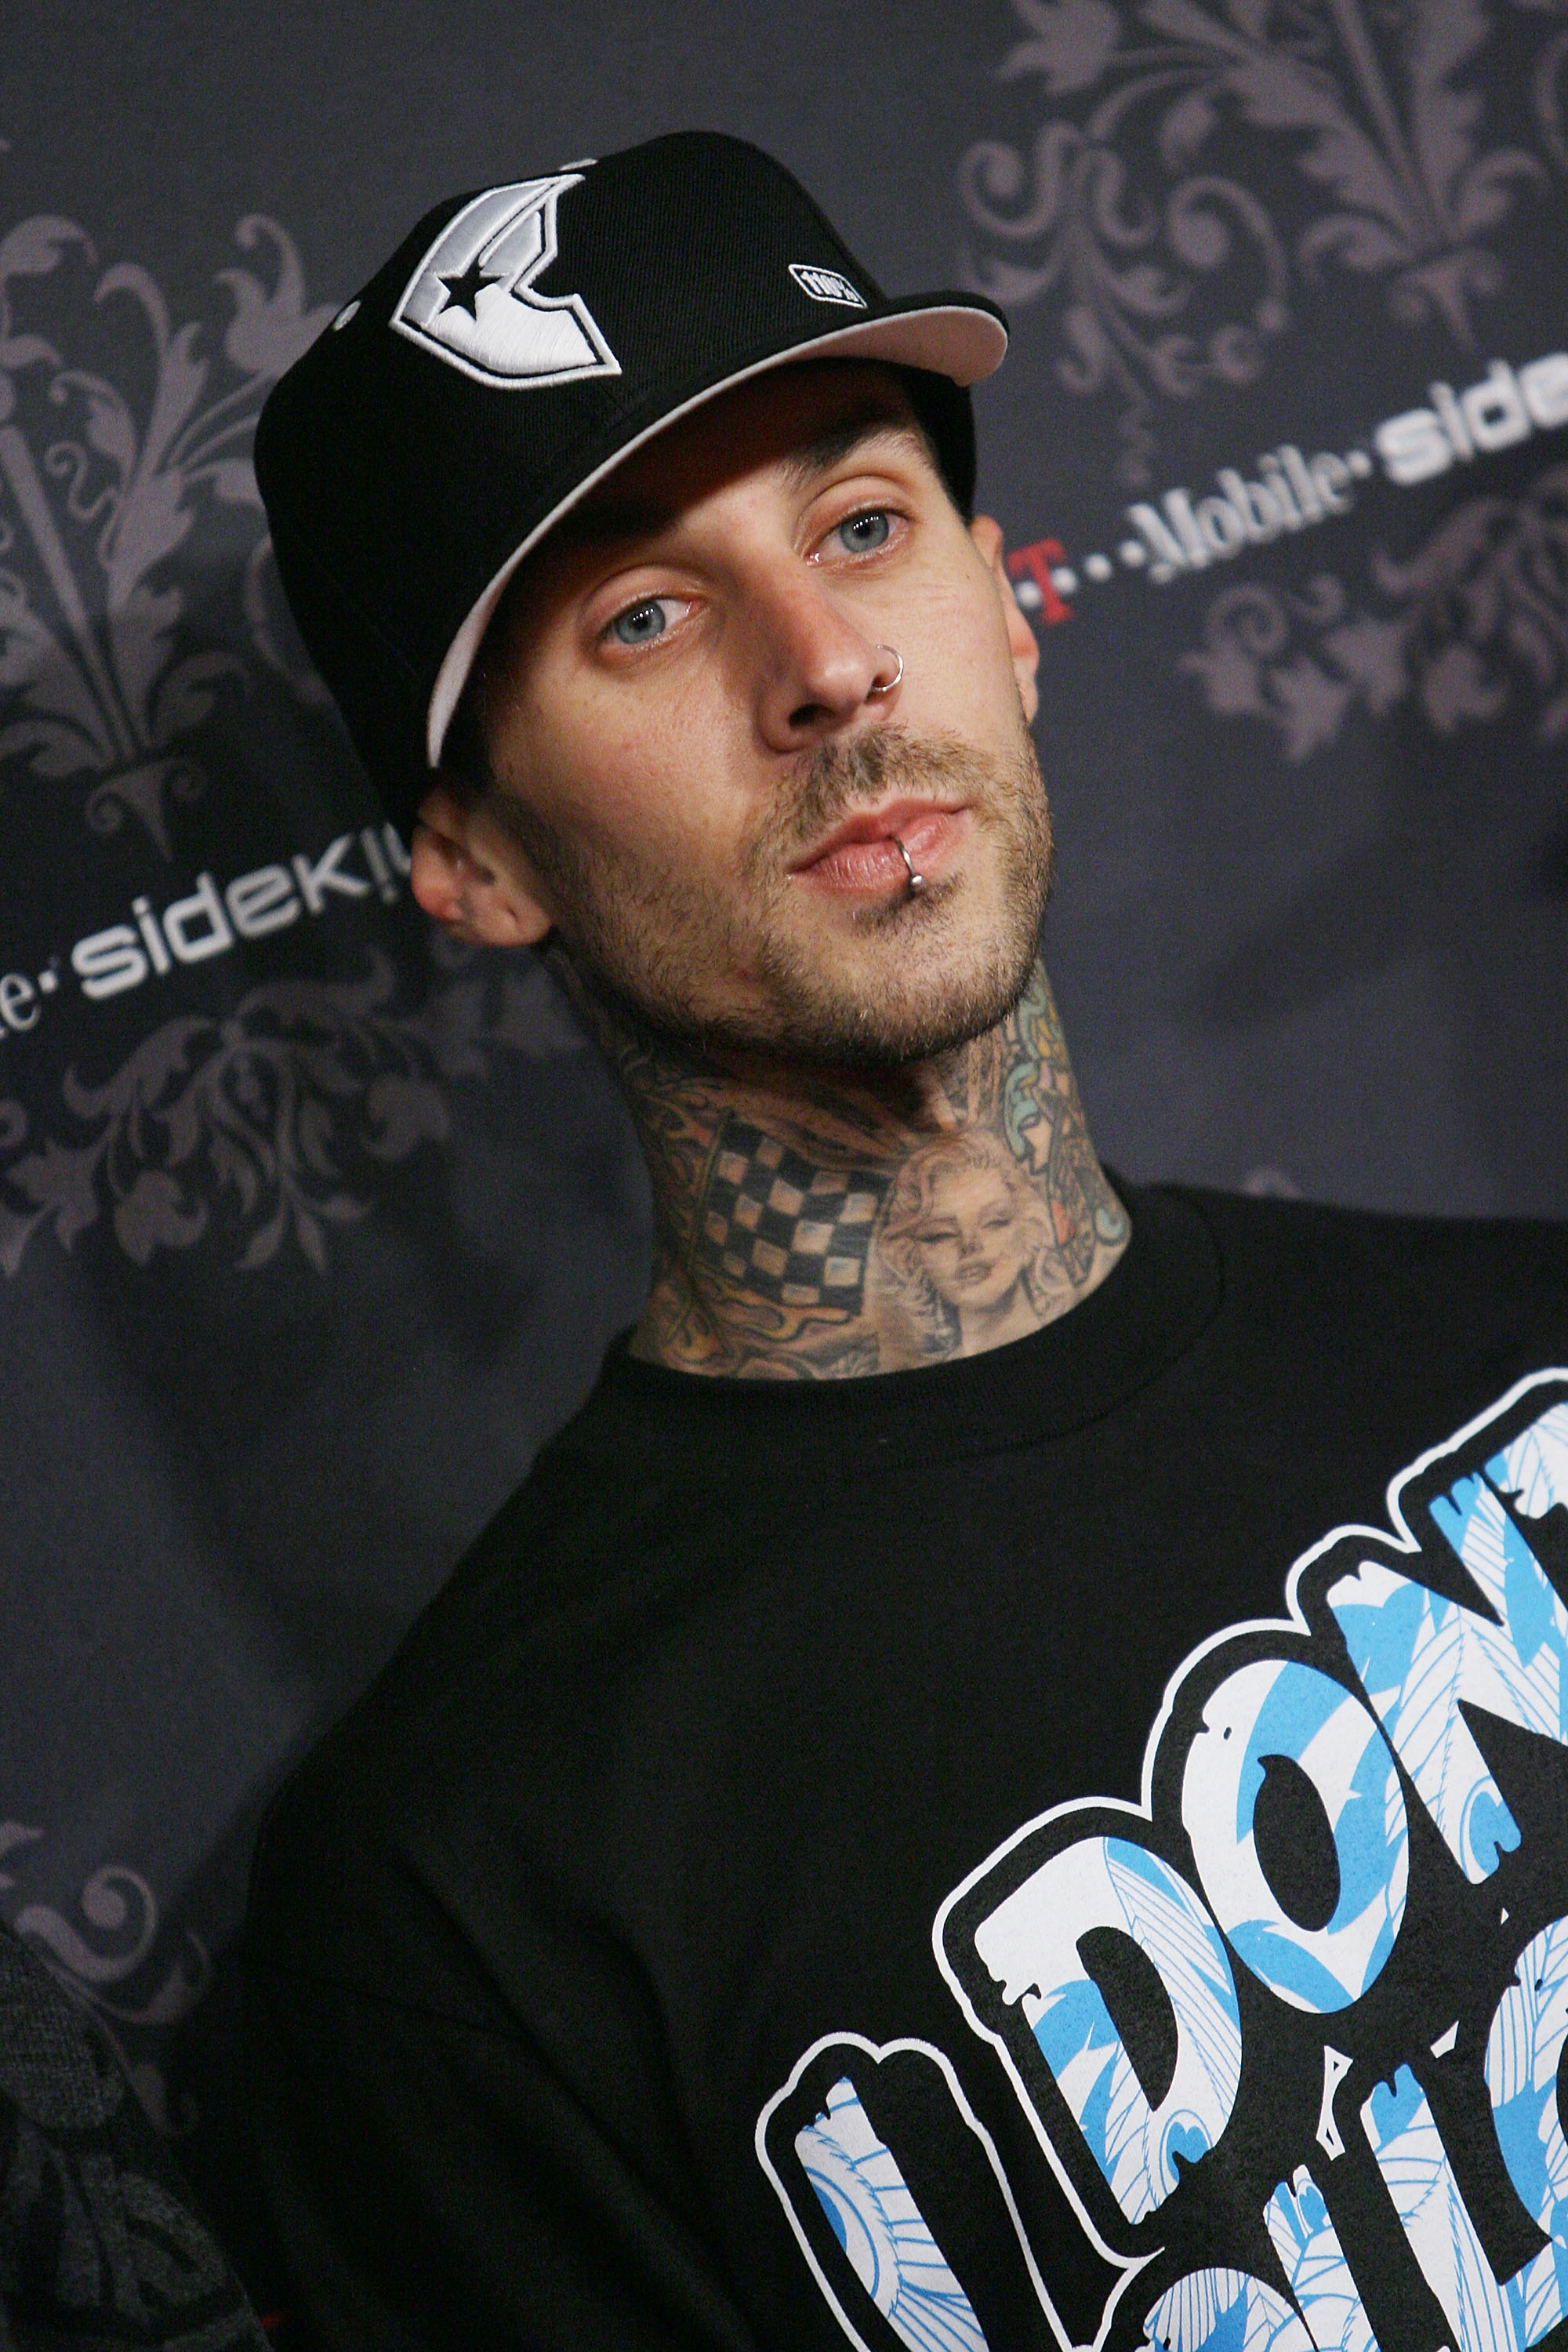 Close-up of Travis wearing a cap and T-shirt